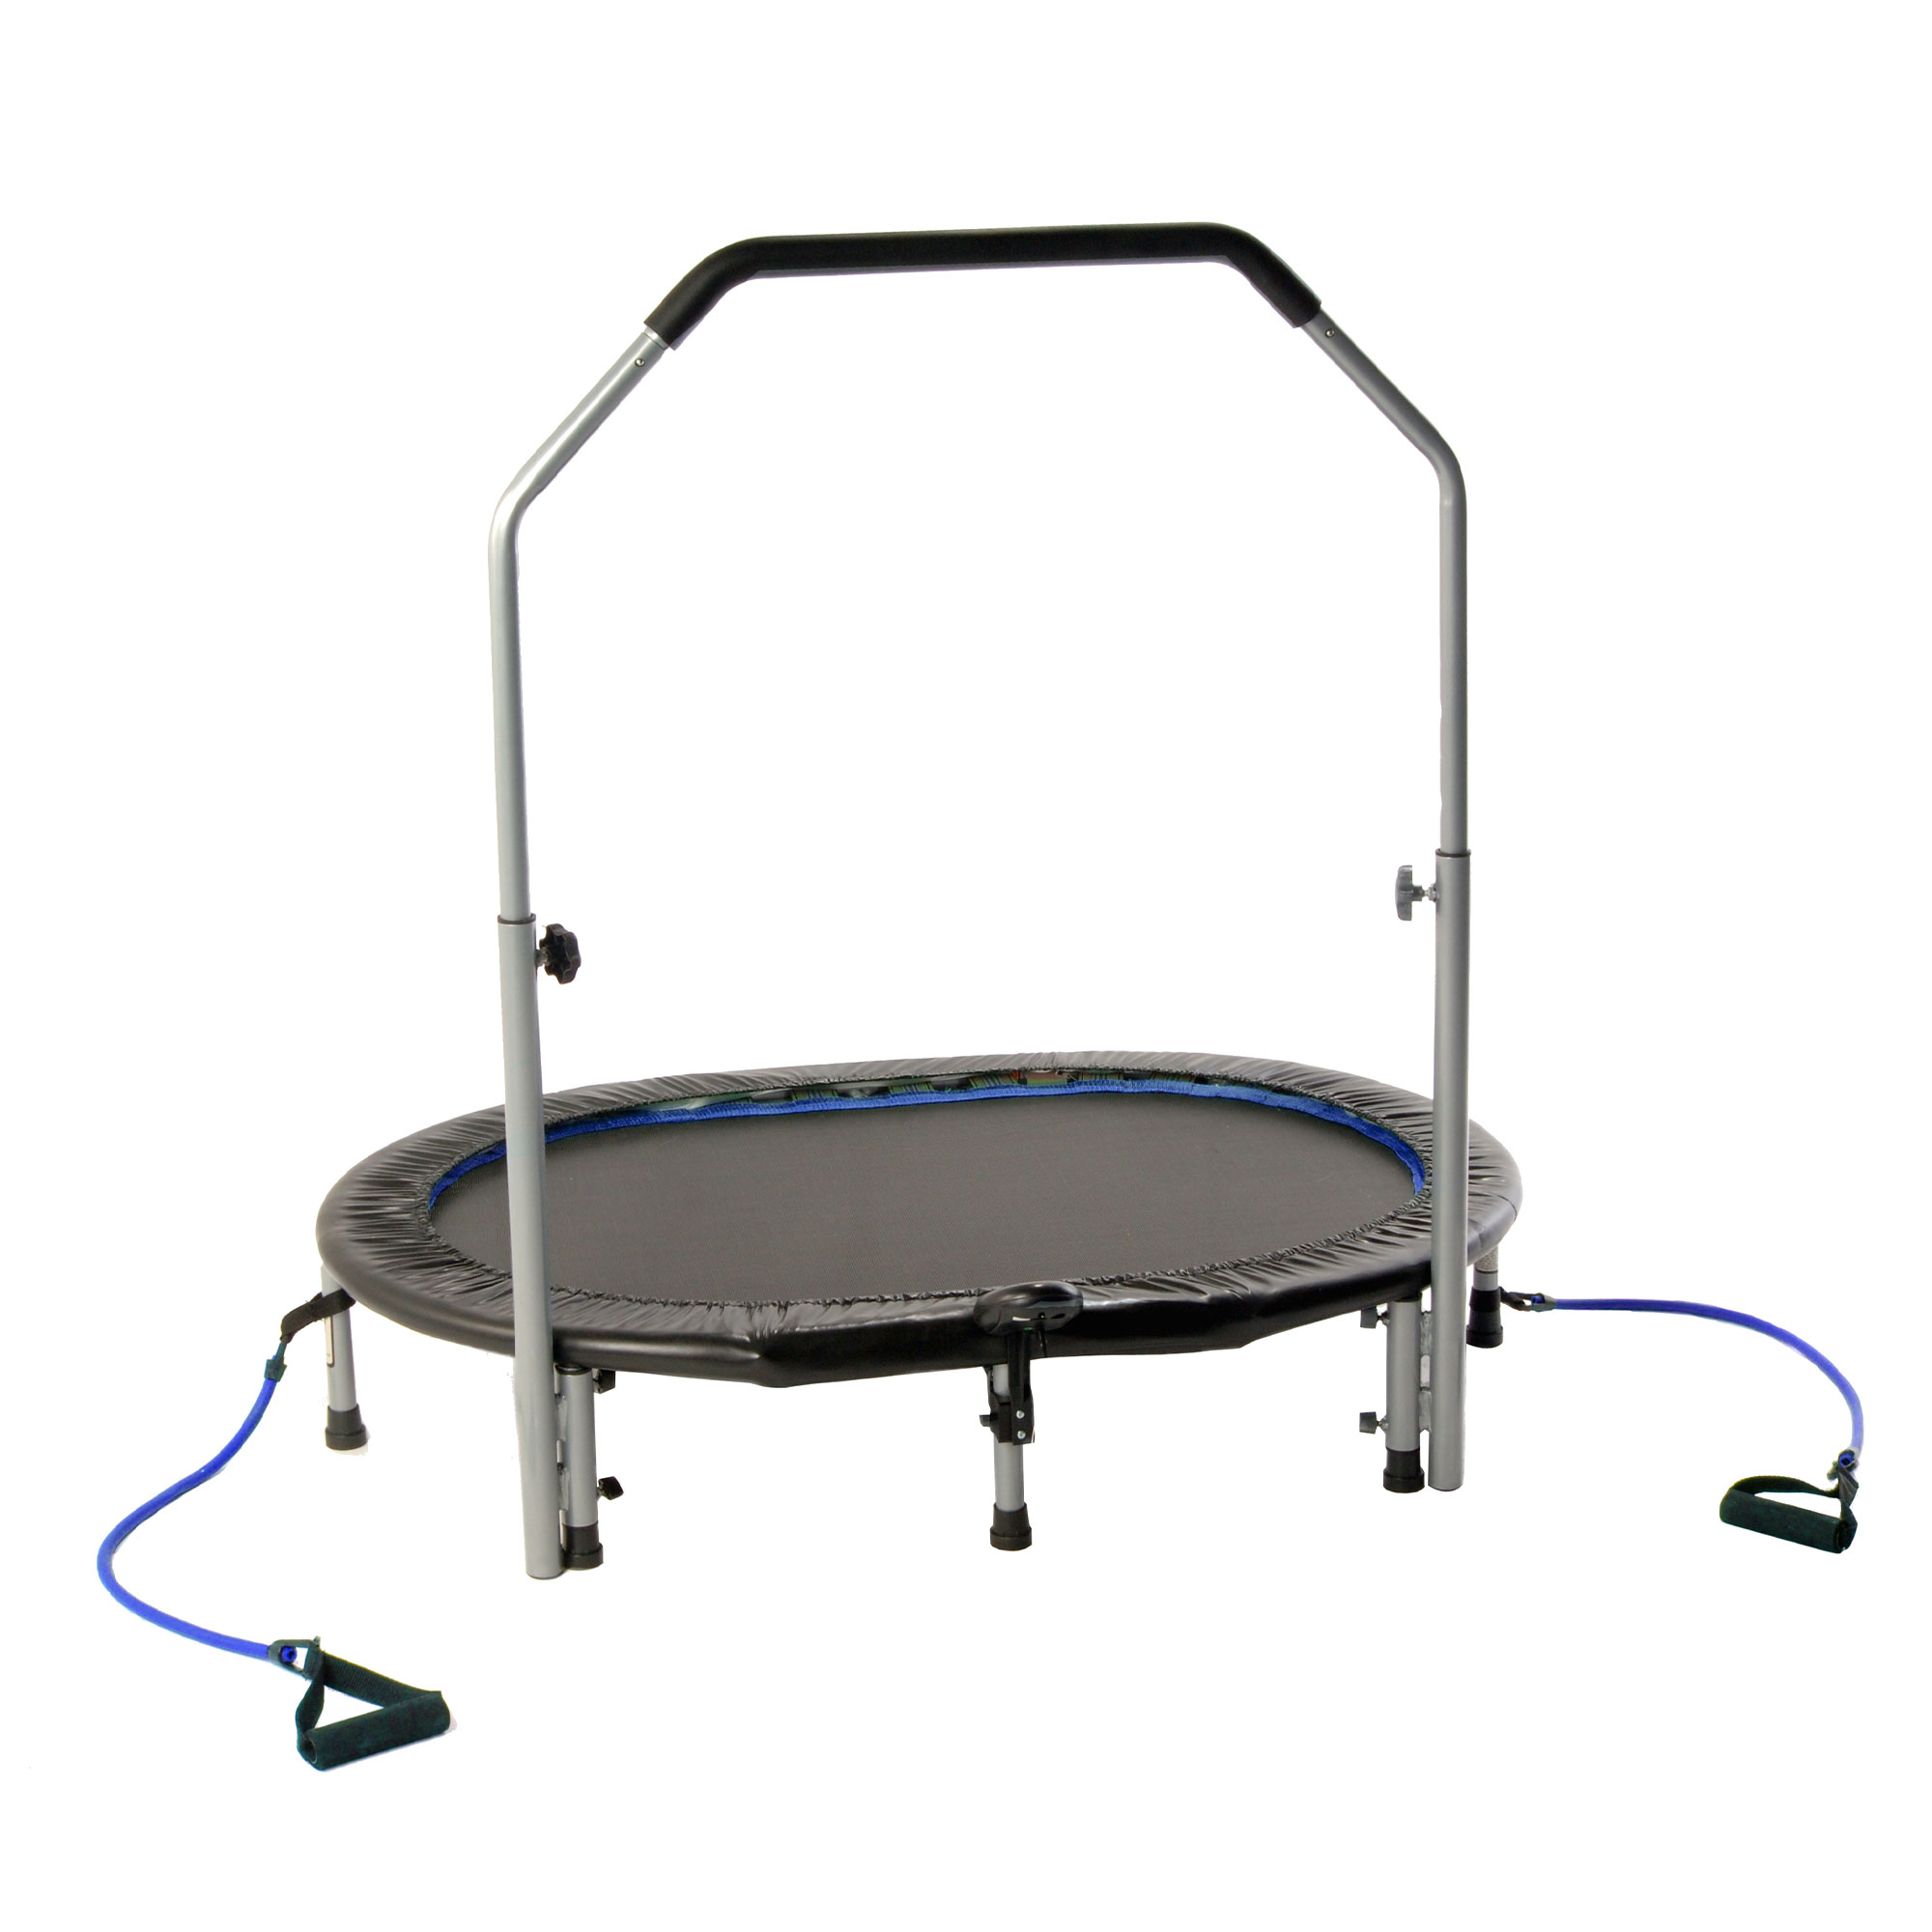 Stamina InTone Oval Fitness Rebounder Trampoline with Handlebars, White - image 1 of 8